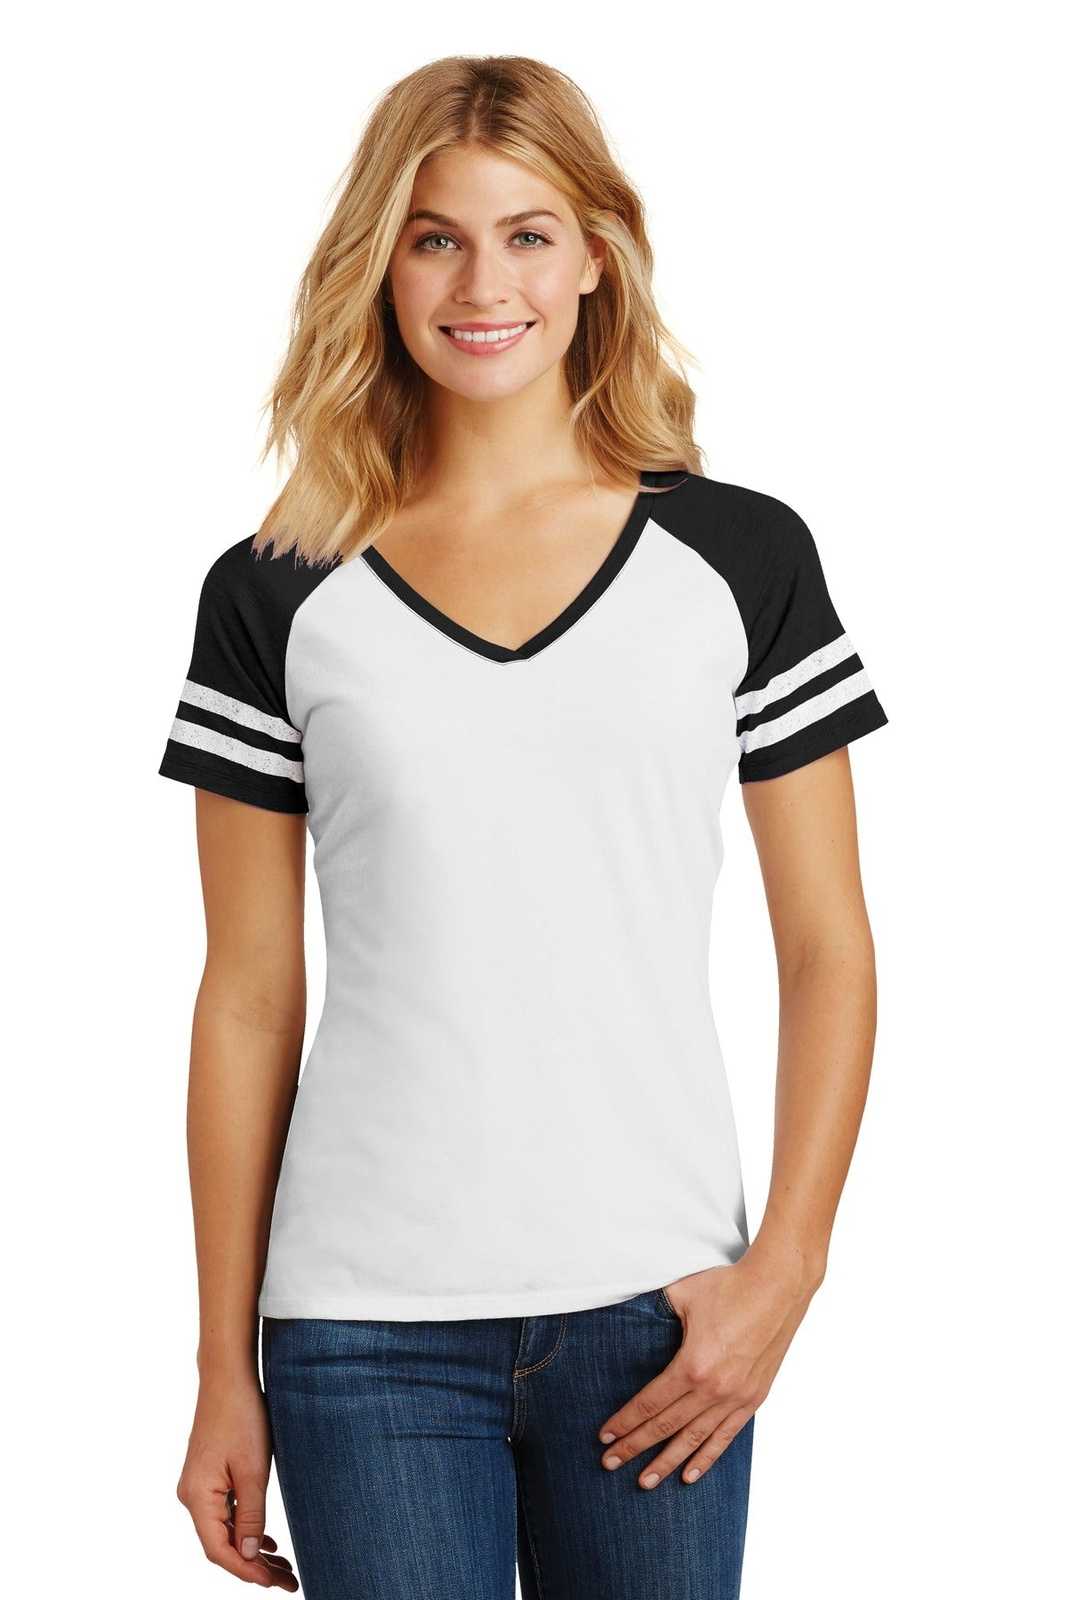 District DM476 Women's Game V-Neck Tee - White Black - HIT a Double - 1